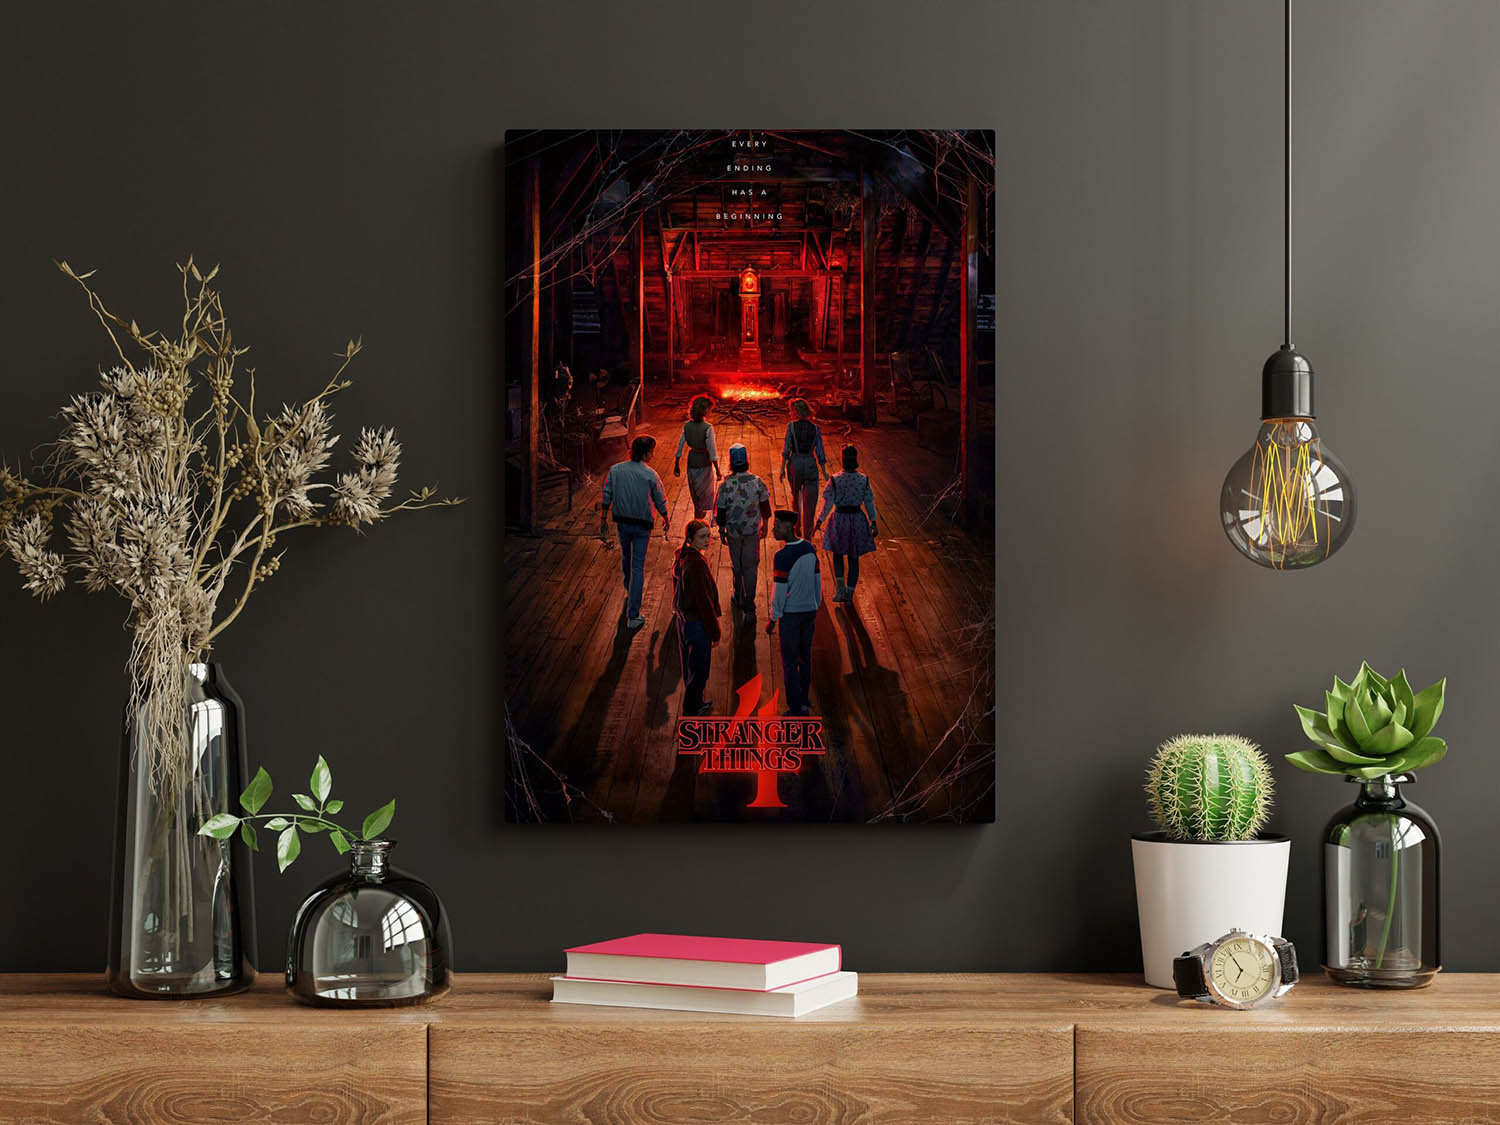 13-enigmatic-facts-about-stranger-things-season-4-poster